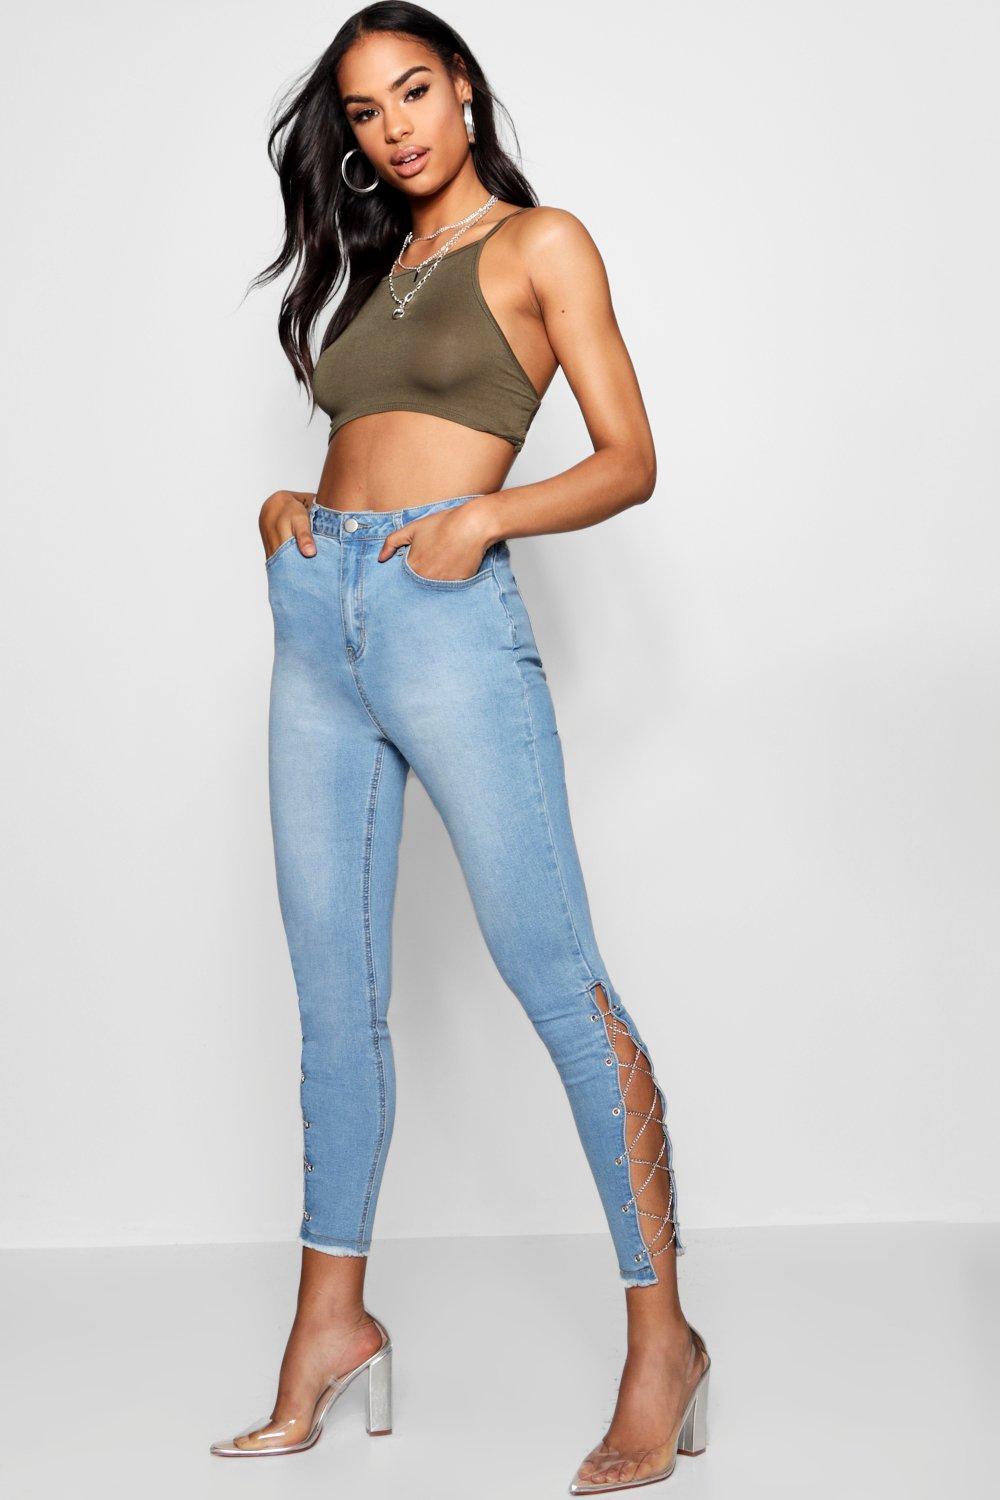 jeans side chain